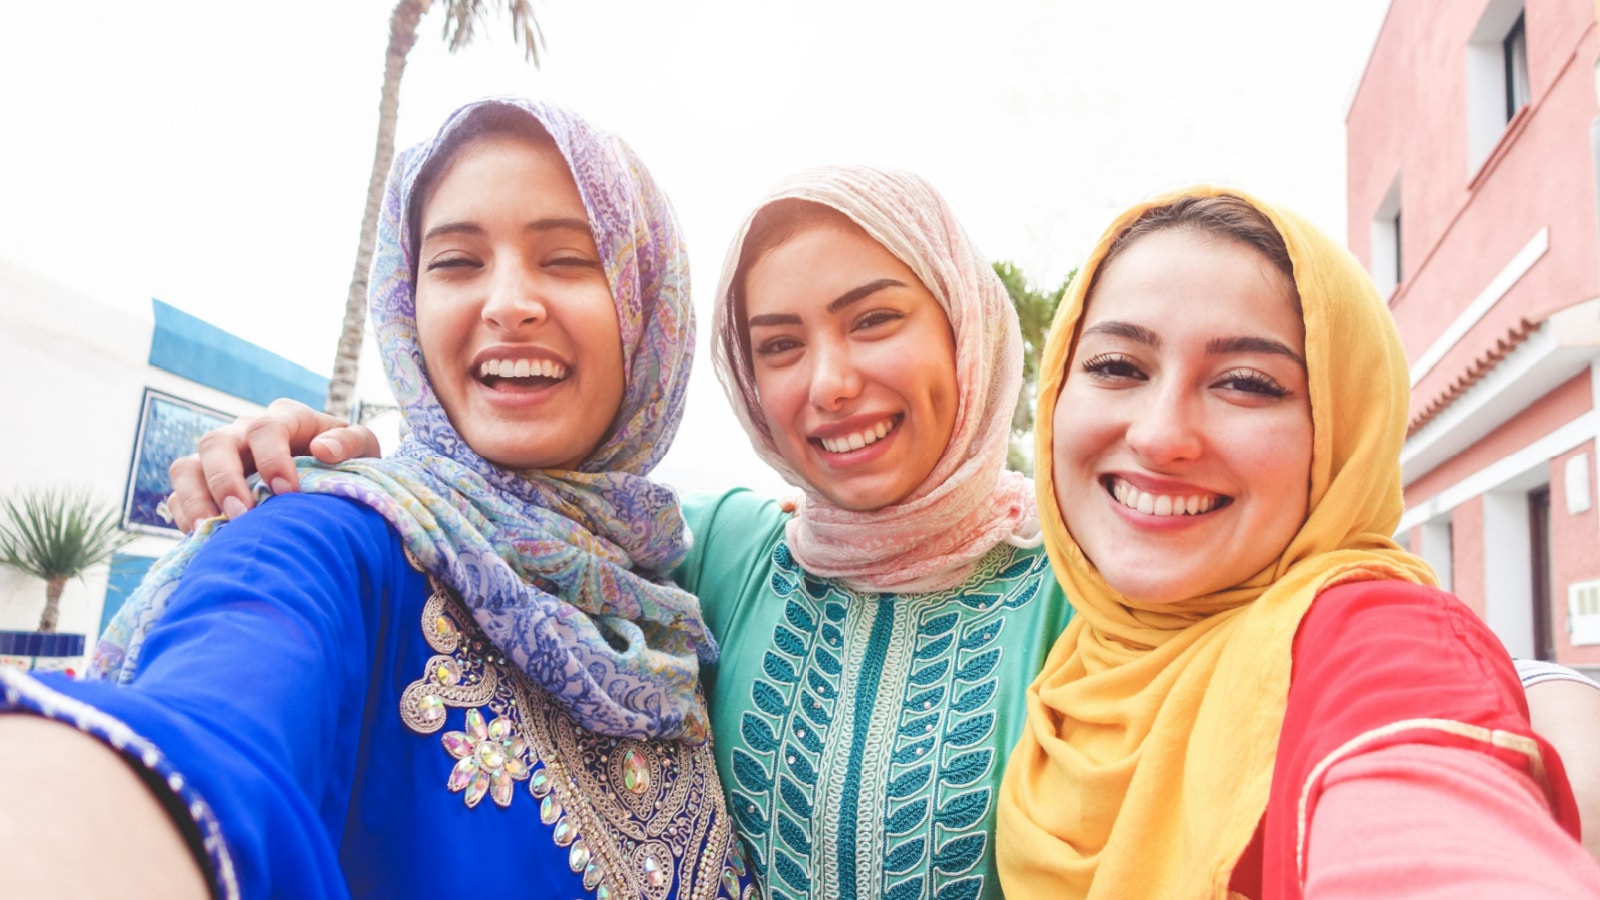 Islamic young friends taking selfie with smartphone camera outdoor - Happy arabian girls having fun with new trend technology - Friendship and millennial app concept - Focus on faces